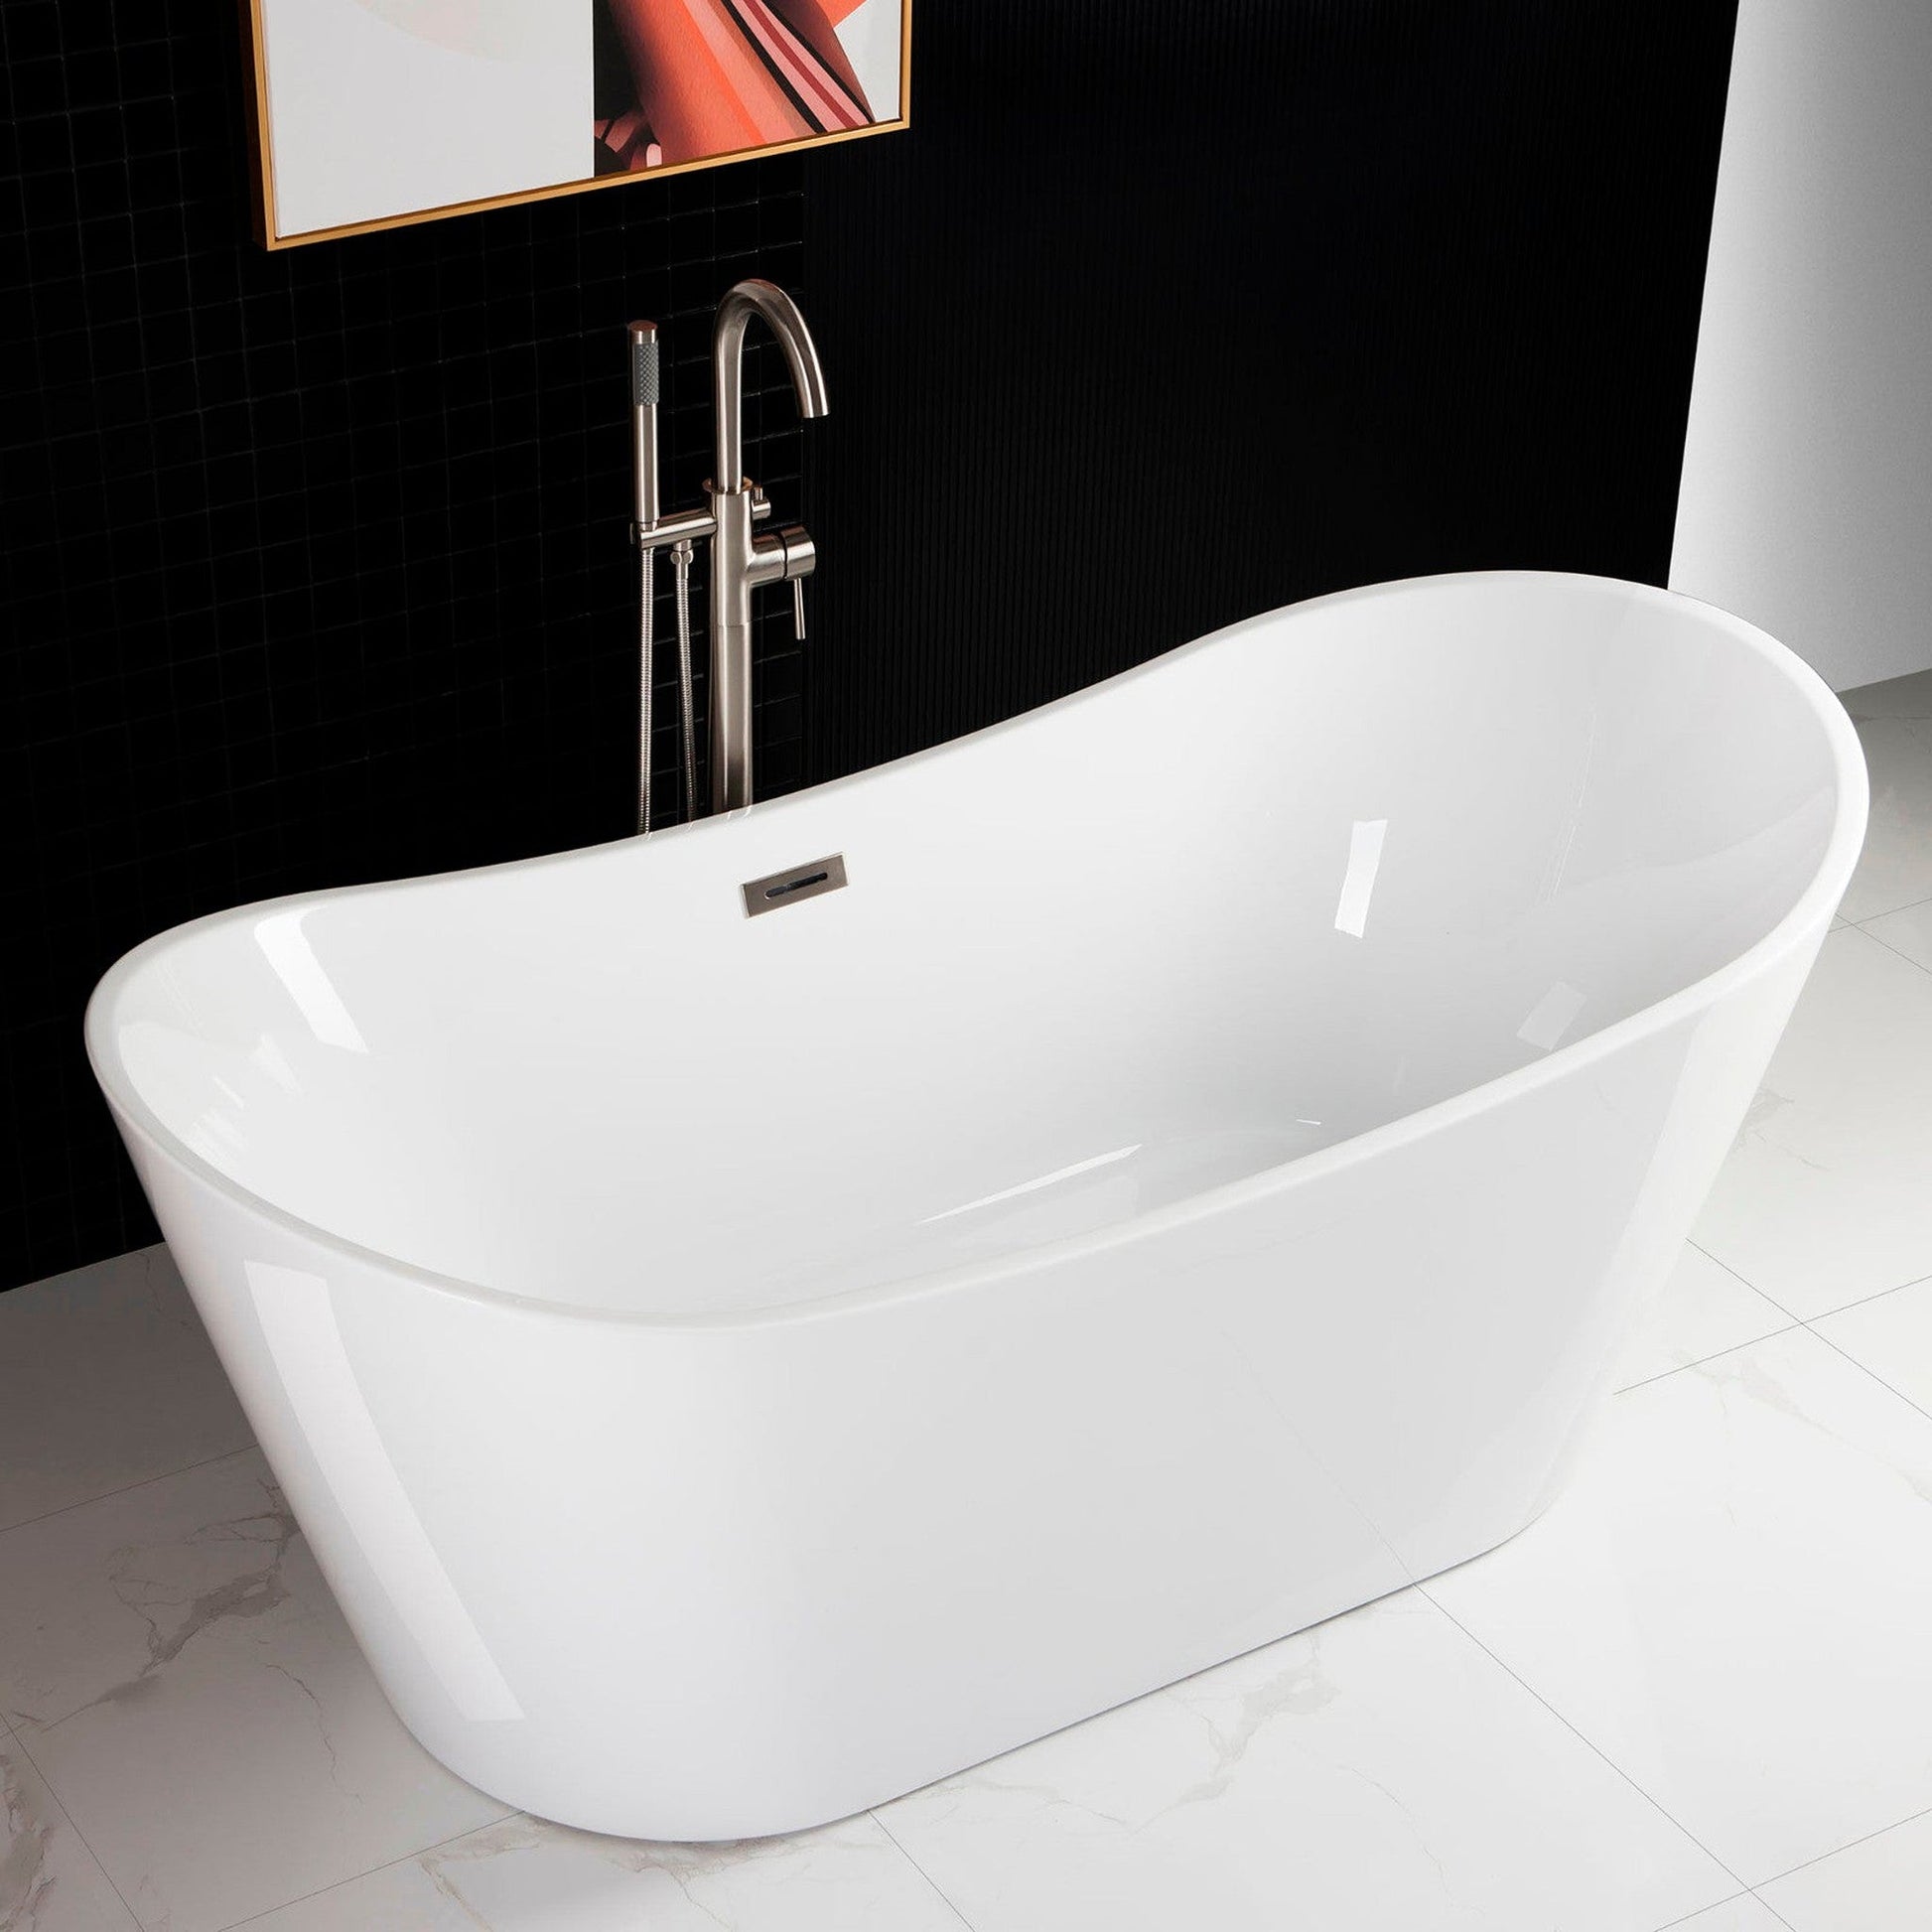 WoodBridge B0010 67" White Acrylic Freestanding Contemporary Soaking Bathtub With Chrome Drain, Overflow, F0071CHDR Tub Filler and Caddy Tray